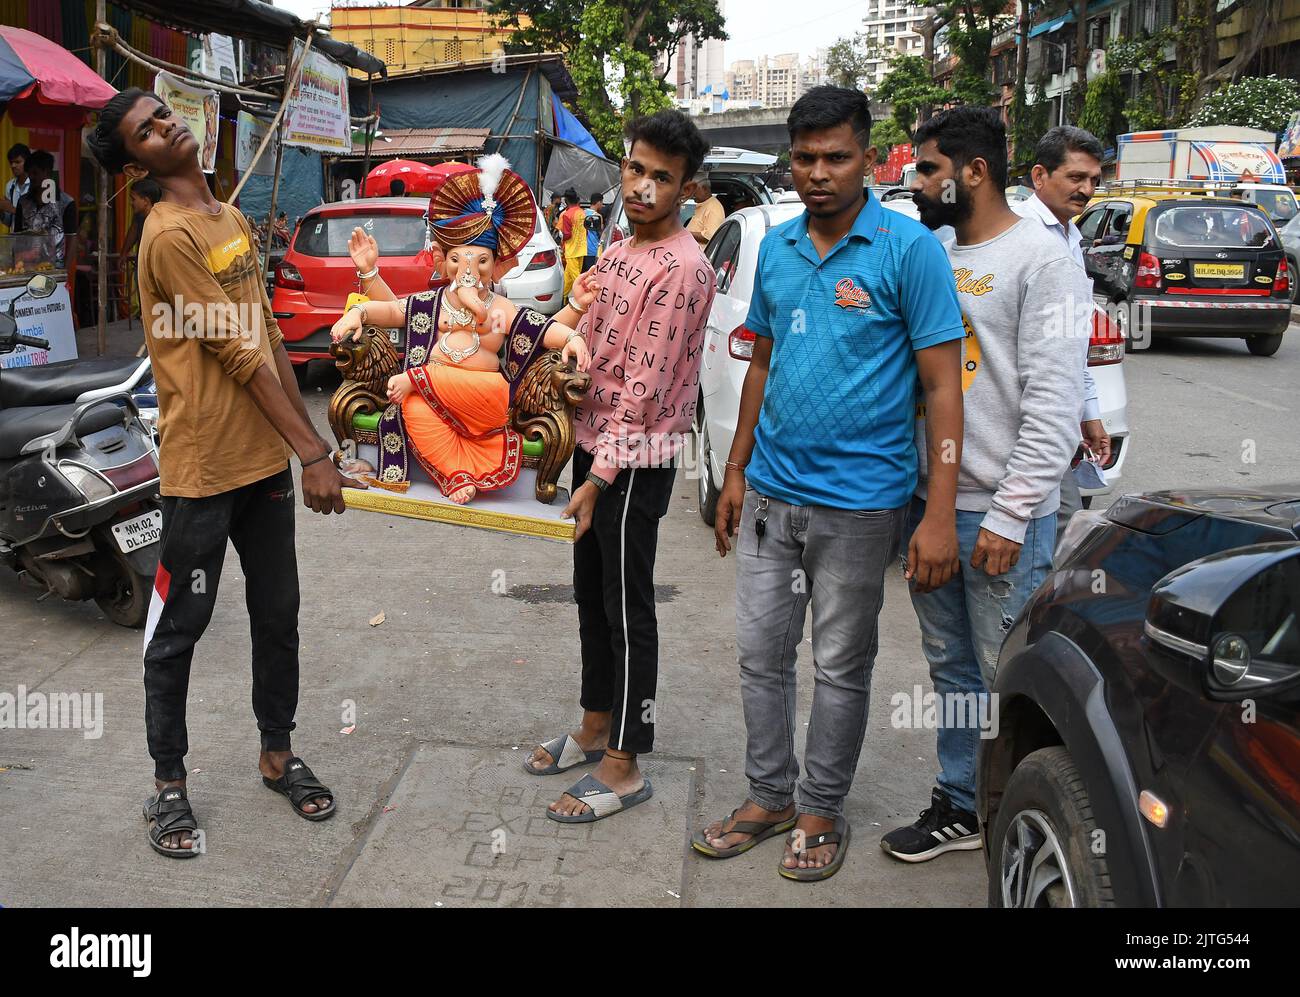 Mumbai, India. 30th Aug, 2022. Devotees pose for a photo holding an idol of elephant headed Hindu god Ganesh ahead of Ganesh Chaturthi. The 10 days festival of Ganesh Chaturthi begins 31st August where devotees pray and seek blessings from the god of wisdom, knowledge and prosperity. Credit: SOPA Images Limited/Alamy Live News Stock Photo